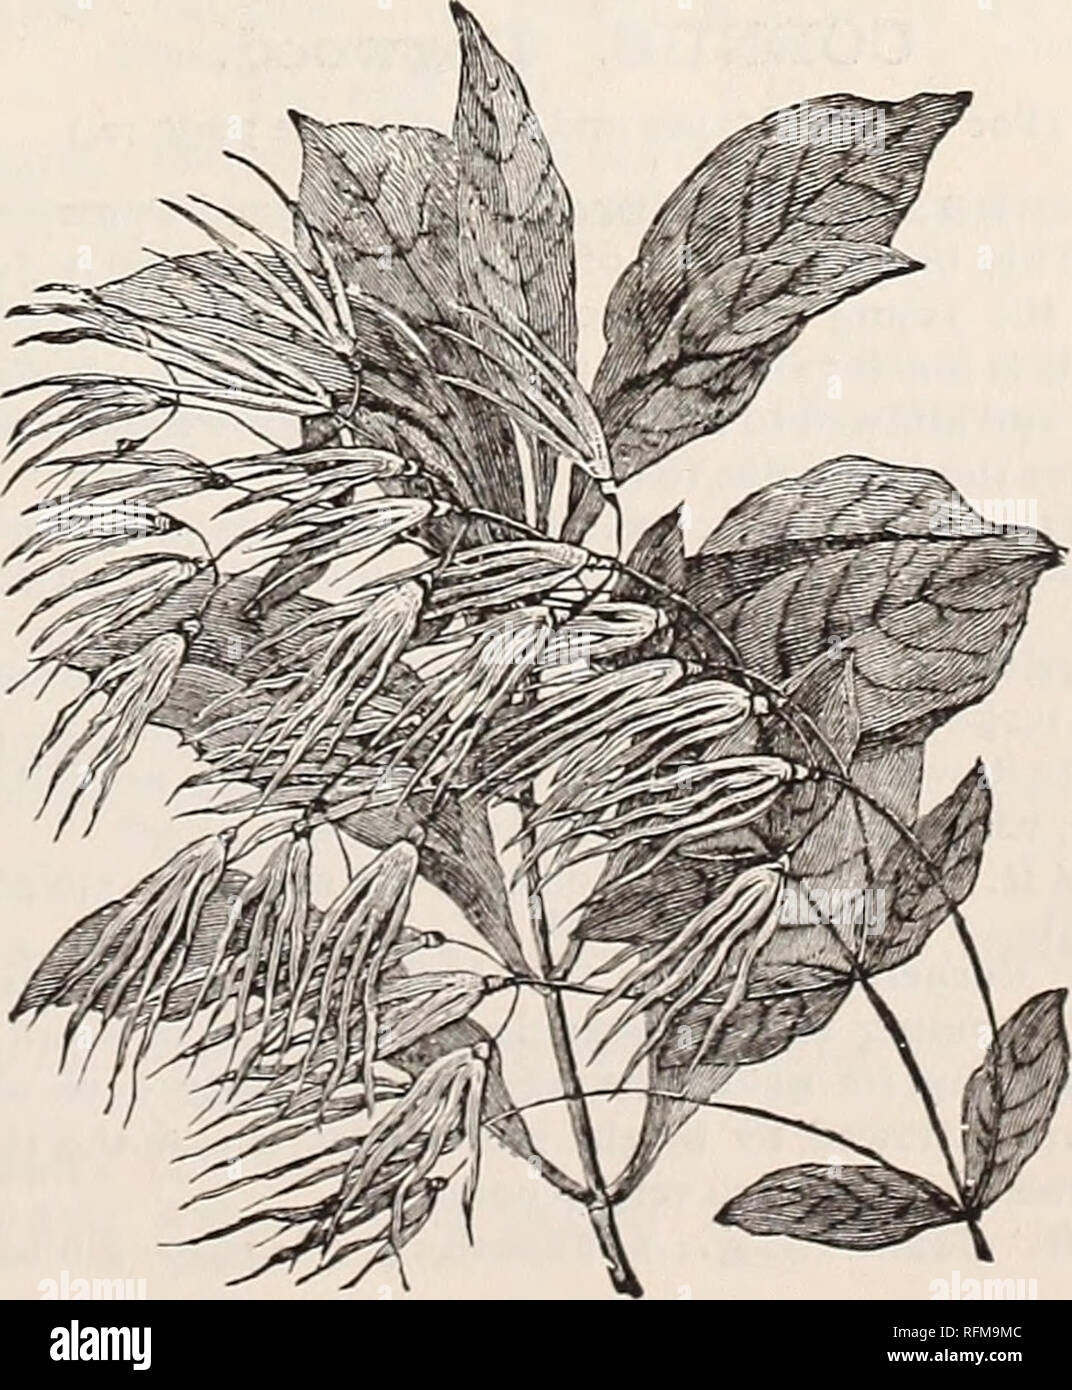 . Descriptive catalogue of ornamental trees, shrubs, vines, evergreens, hardy plants and fruits. Nurseries (Horticulture), Pennsylvania, Catalogs; Trees, Seedlings, Catalogs; Ornamental shrubs, Catalogs; Flowers, Catalogs; Plants, Ornamental, Catalogs; Fruit, Catalogs. CBPHALANTHUS. Cephalanthus occidentaiis. (4 to 5 ft.) a good sized native shrub, bearing globular Leads of white flowers about the middle of July, which are similar in appearance to those of a Buttonball tree. It is largely used for giving a natural effect to plantings. 12 to 18 in. Trans $ 25 each $1 50 per 10 $10 00 per 100 18 Stock Photo